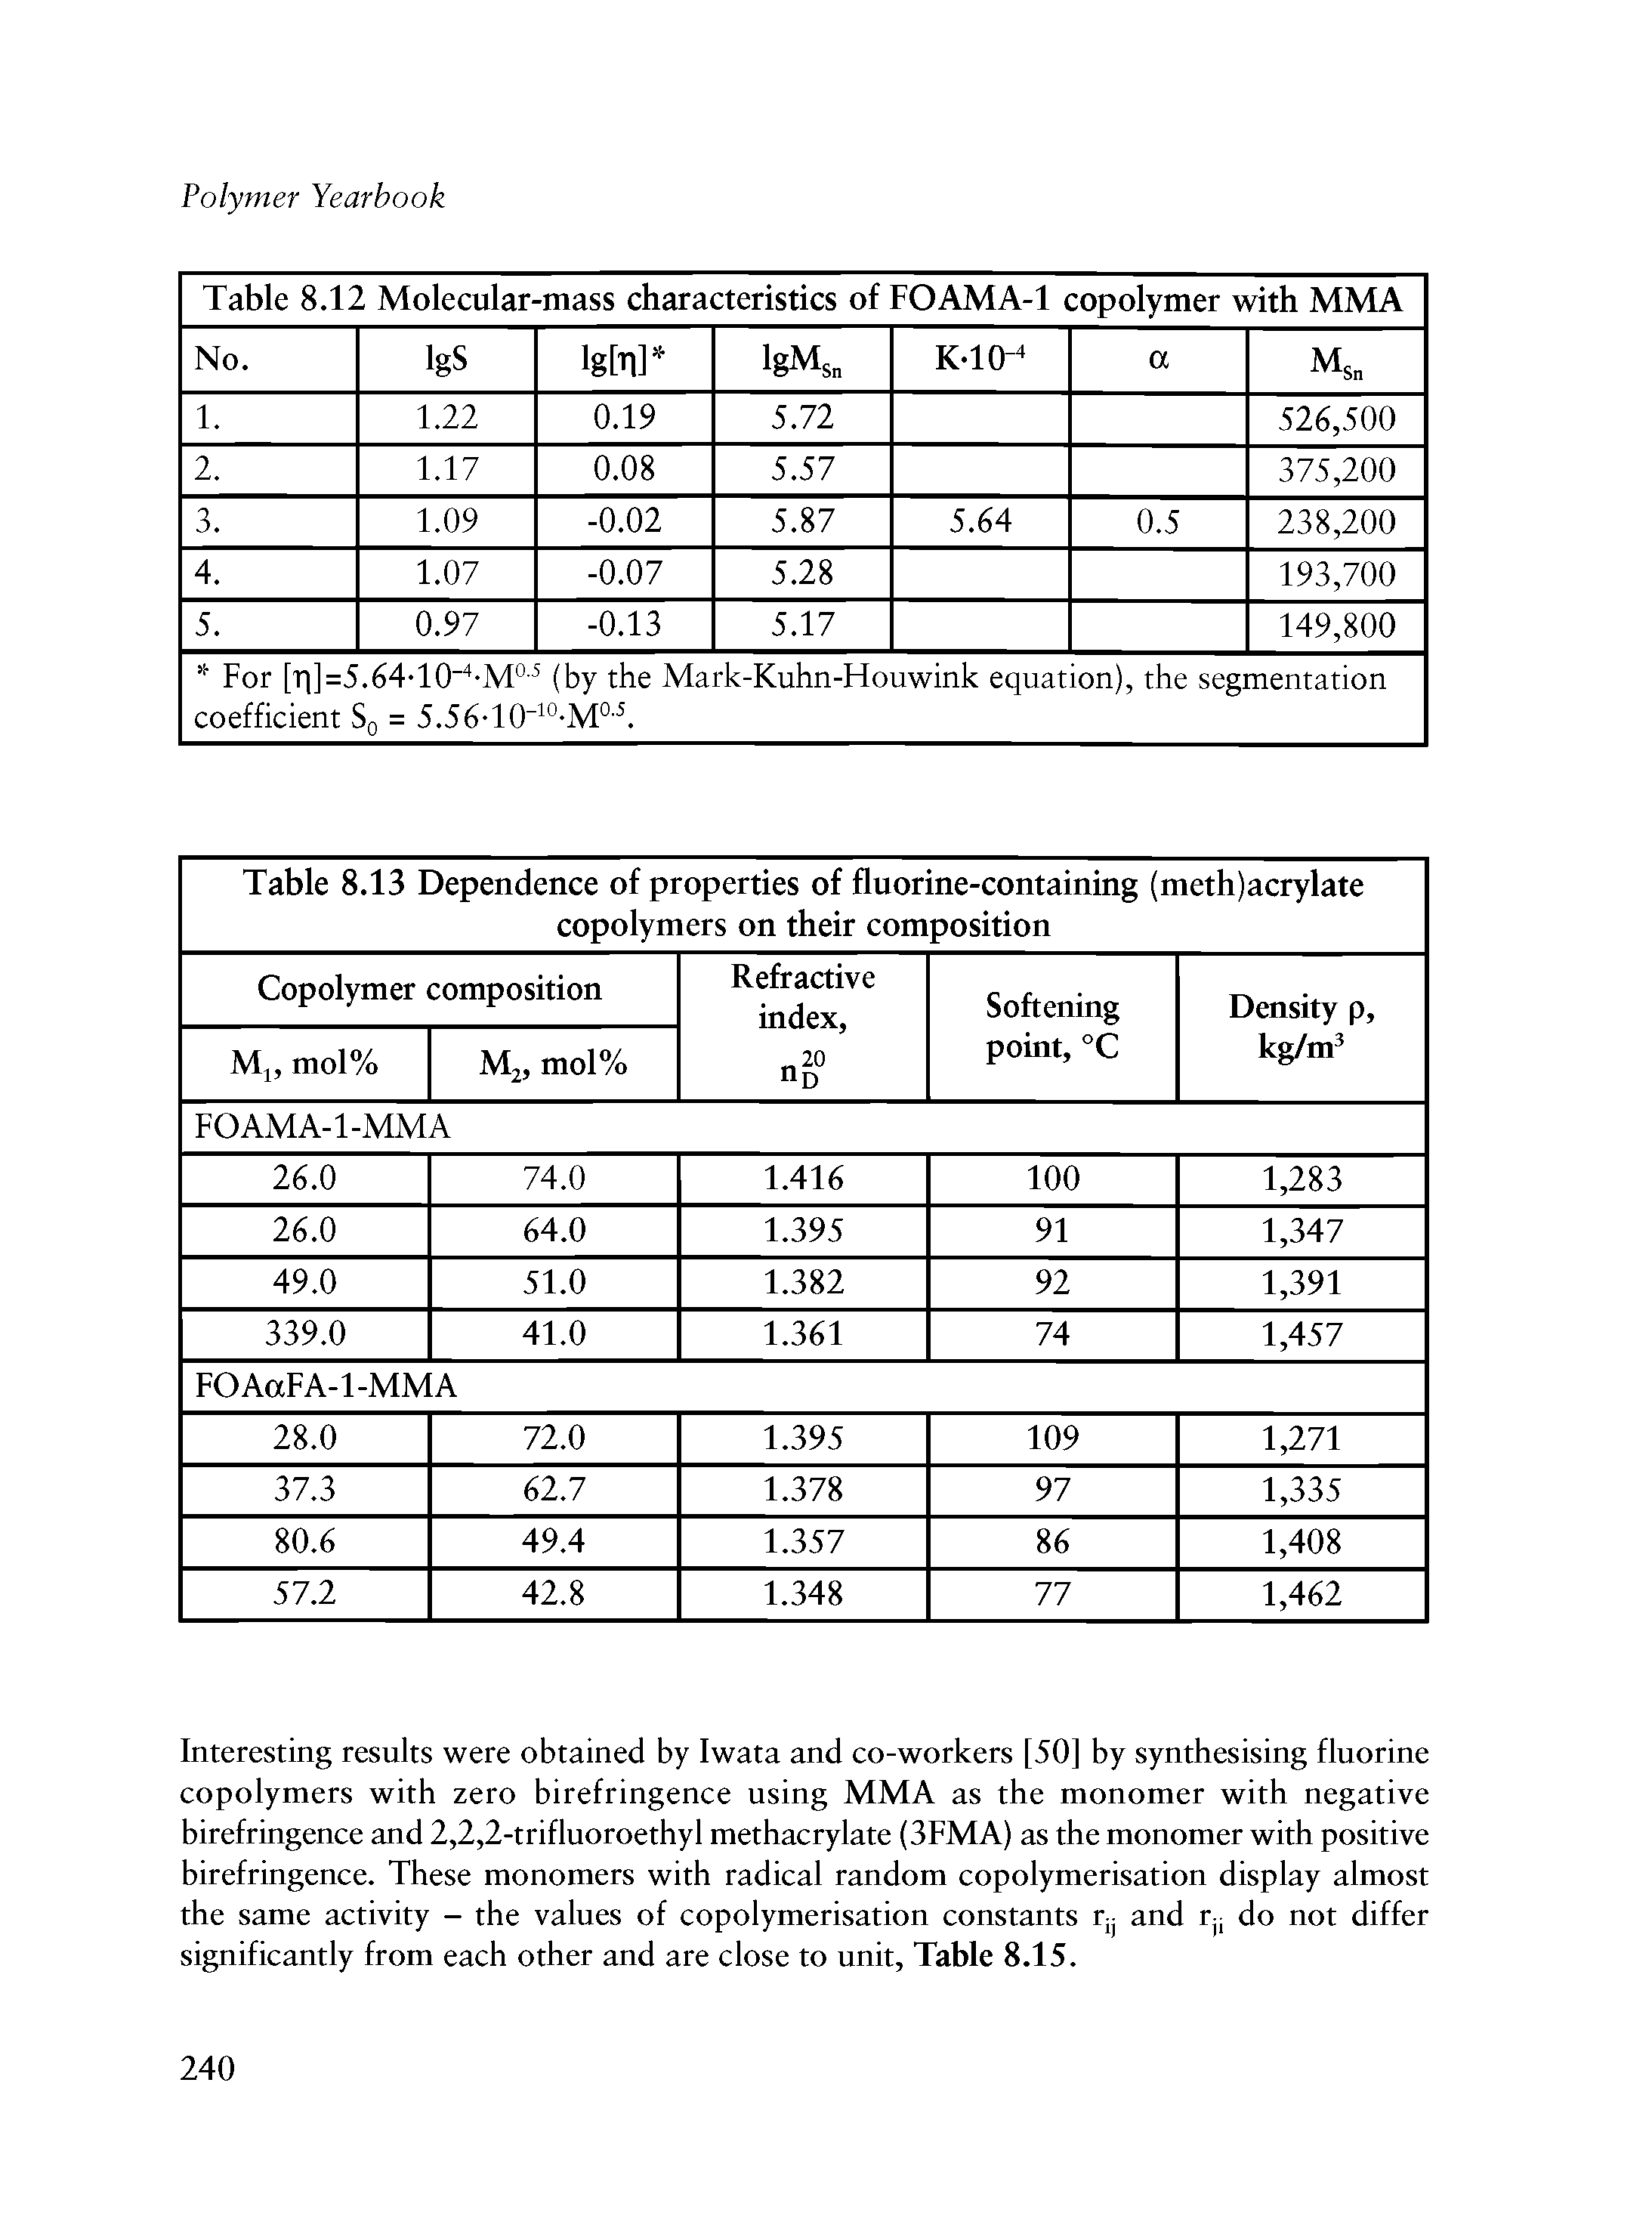 Table 8.13 Dependence of properties of fluorine-containing (meth)acrylate copolymers on their composition ...